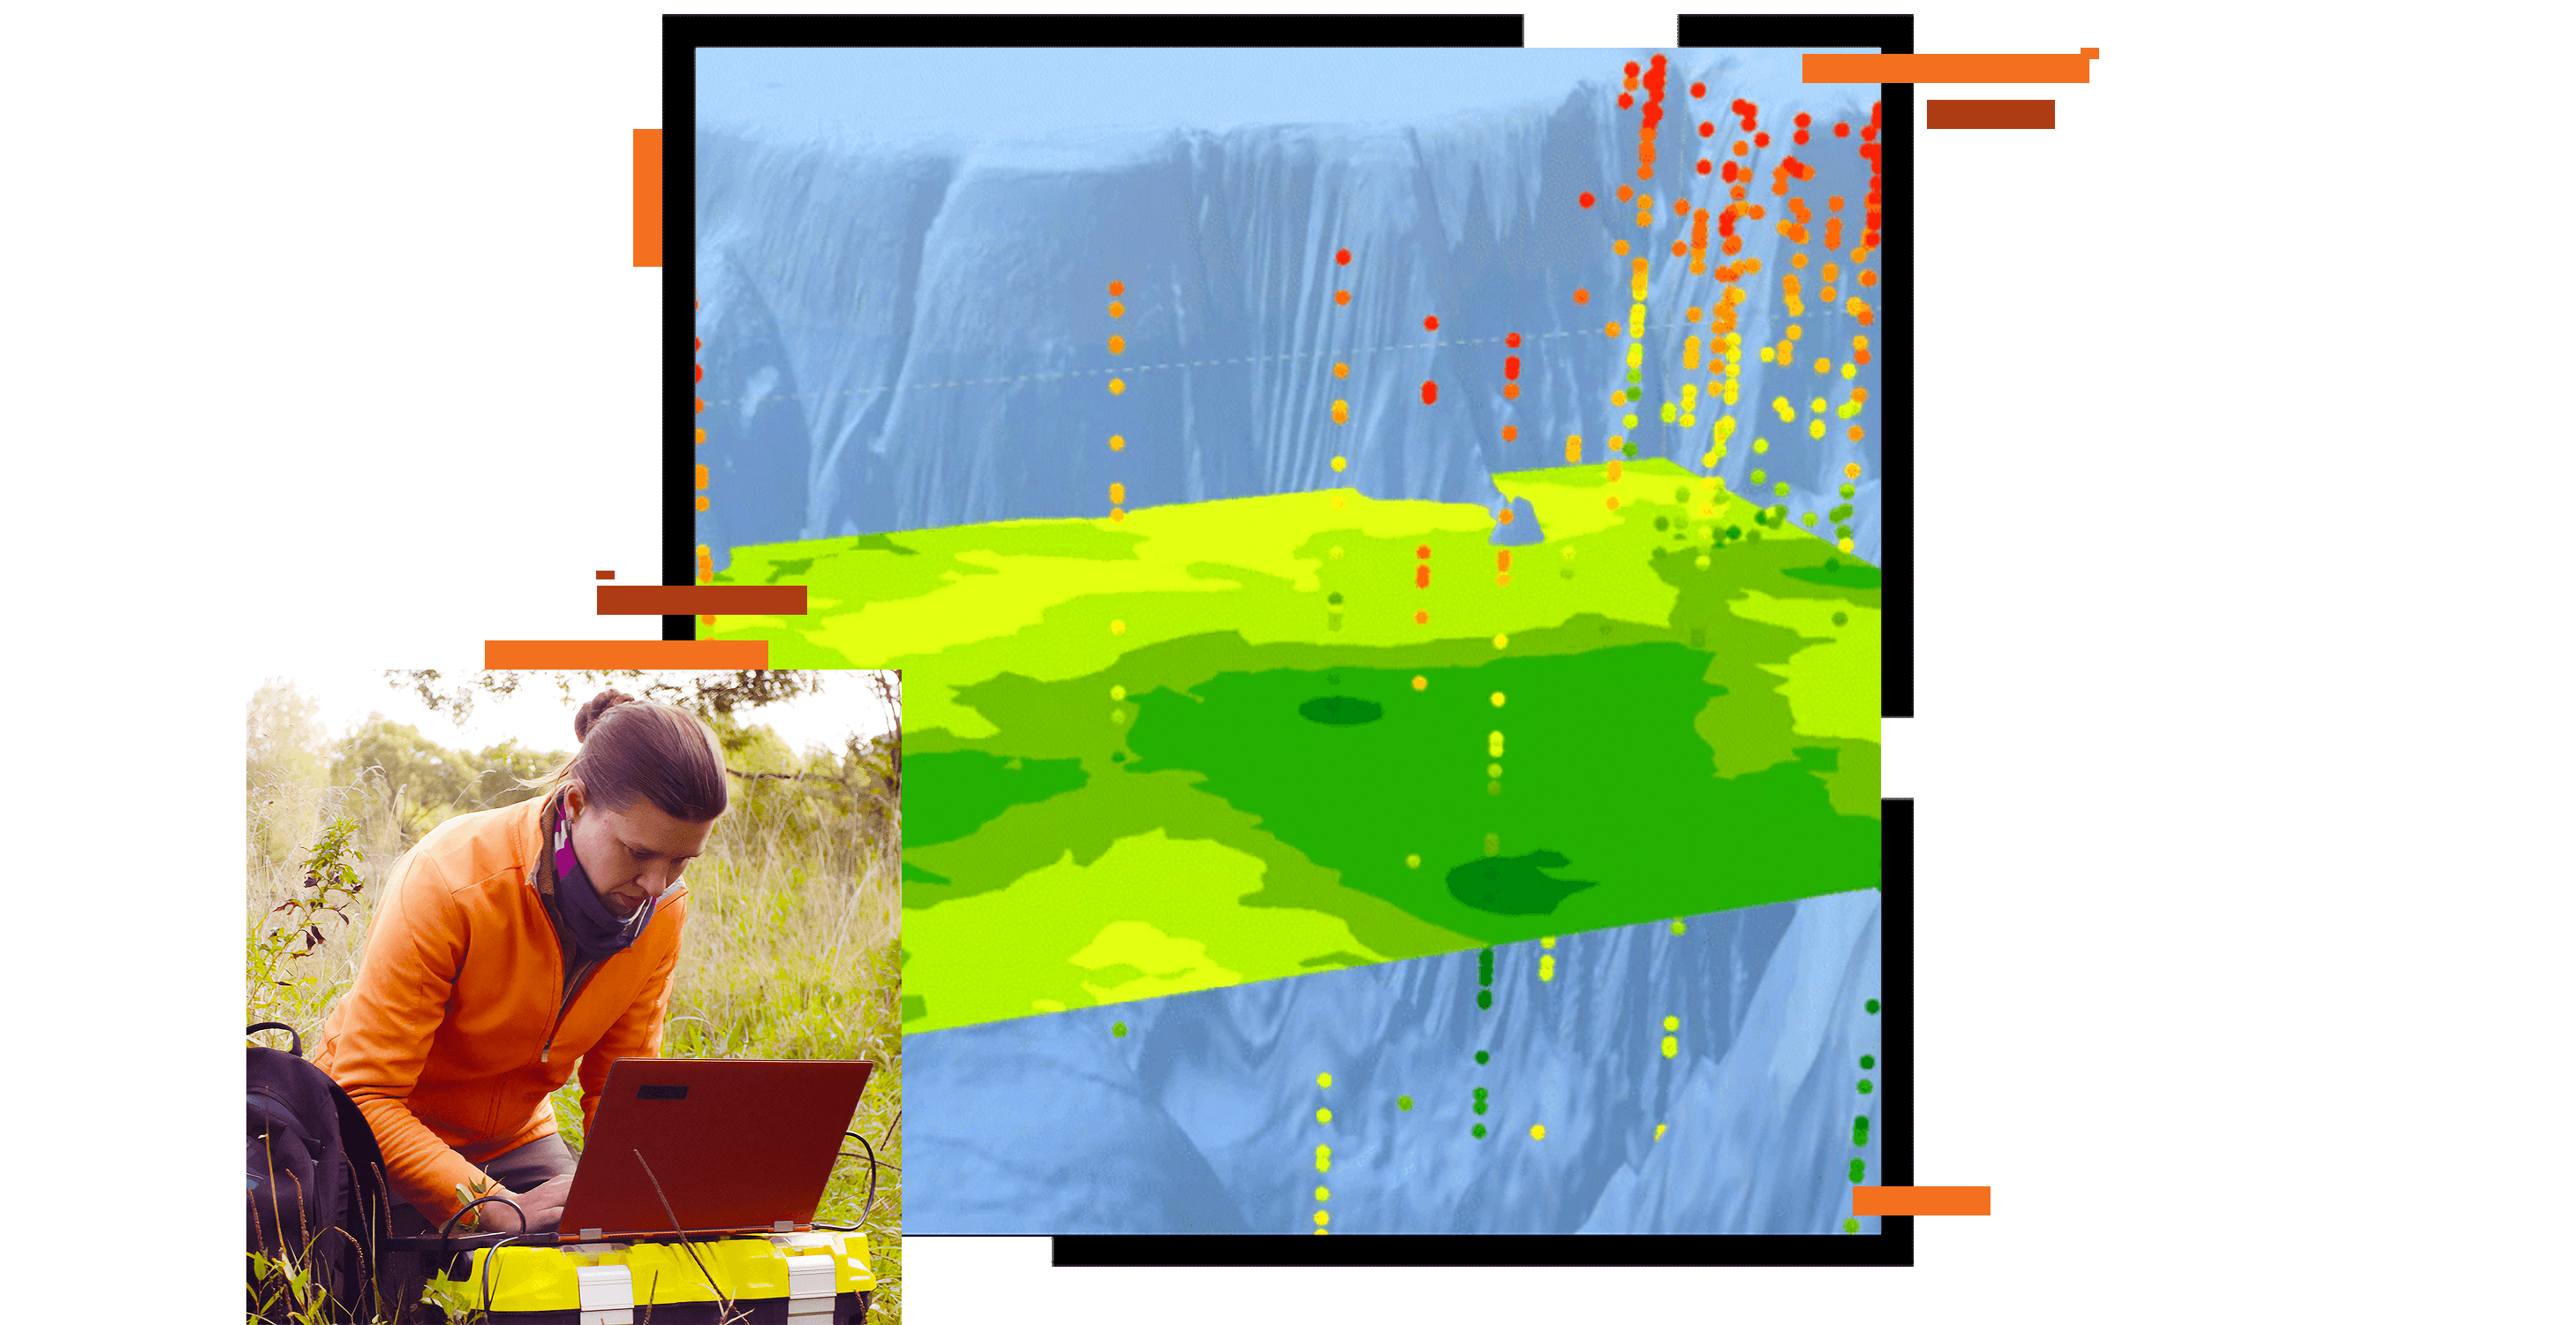 An abstract map layer in green and blue overlaid with a photo of a field researcher using a laptop in an outdoor setting